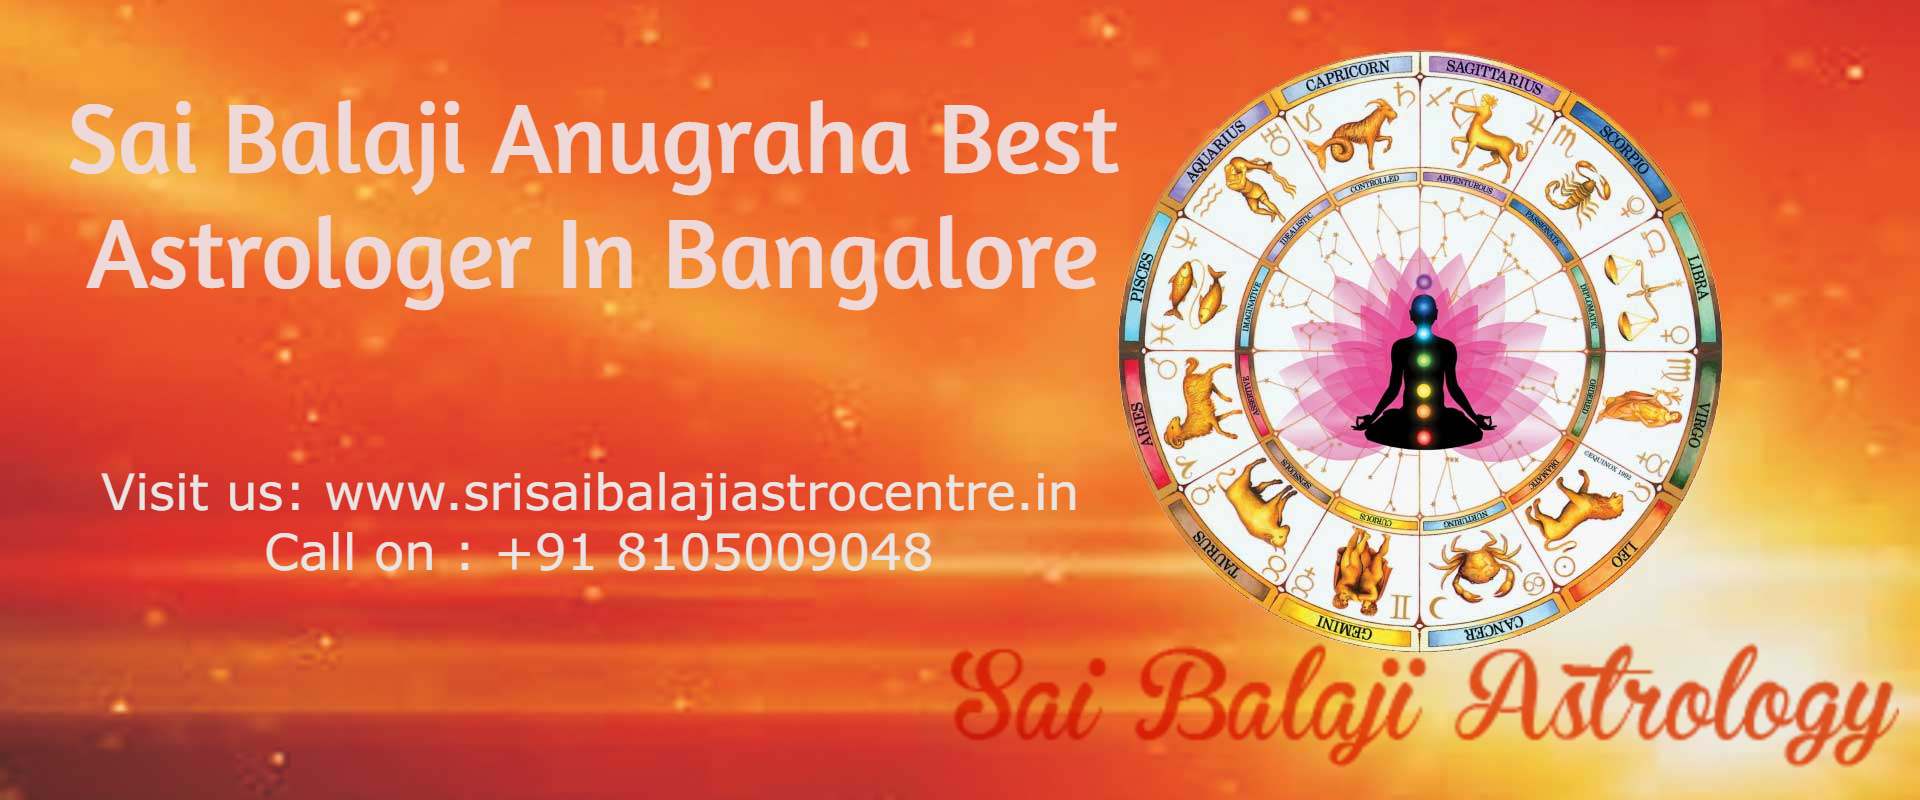 BEST ASTROLOGER IN BANGALORE - srisaibalajiastrocentre.in ...